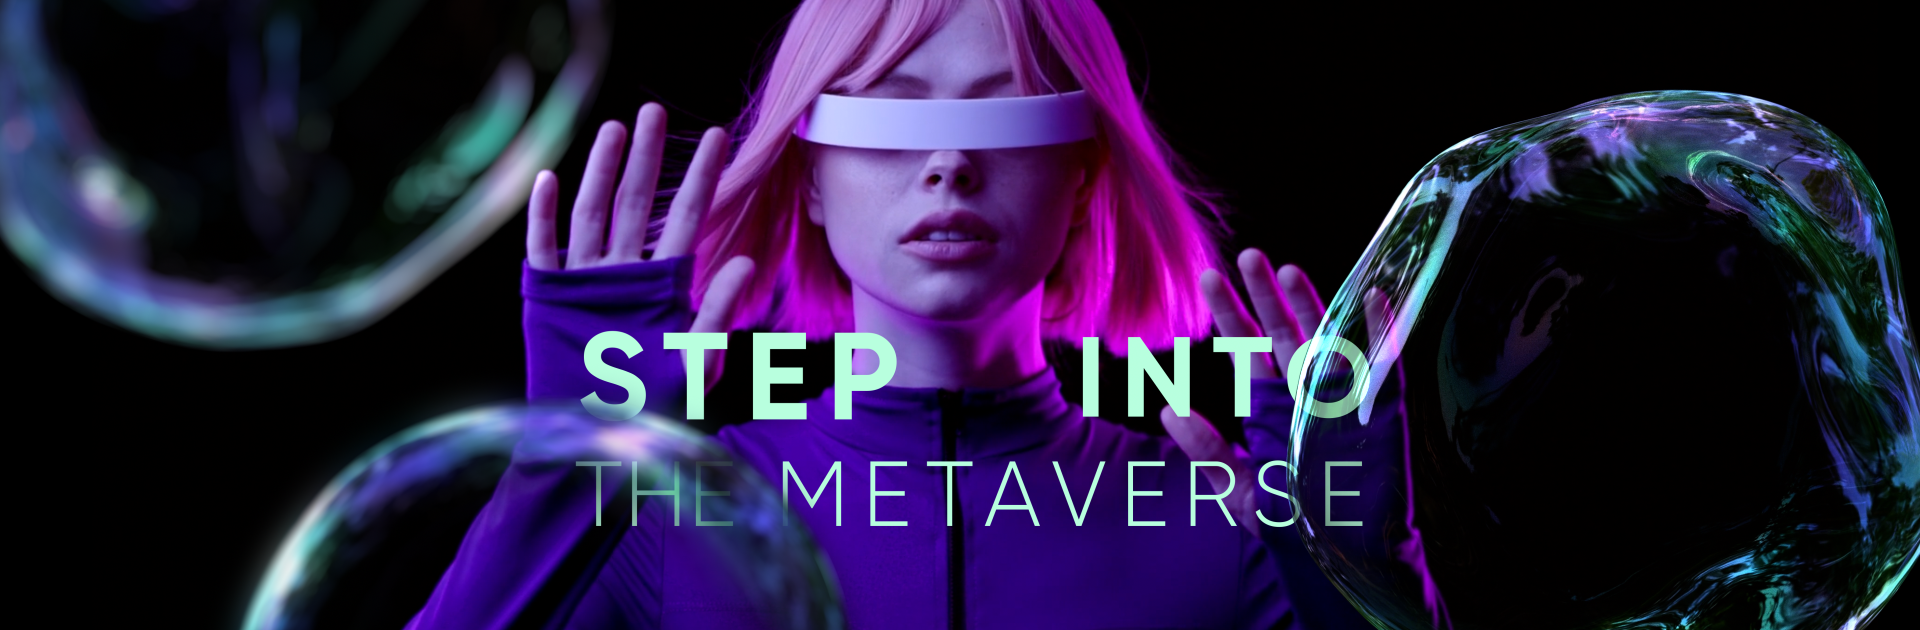 The Metaverse and Digital Marketing